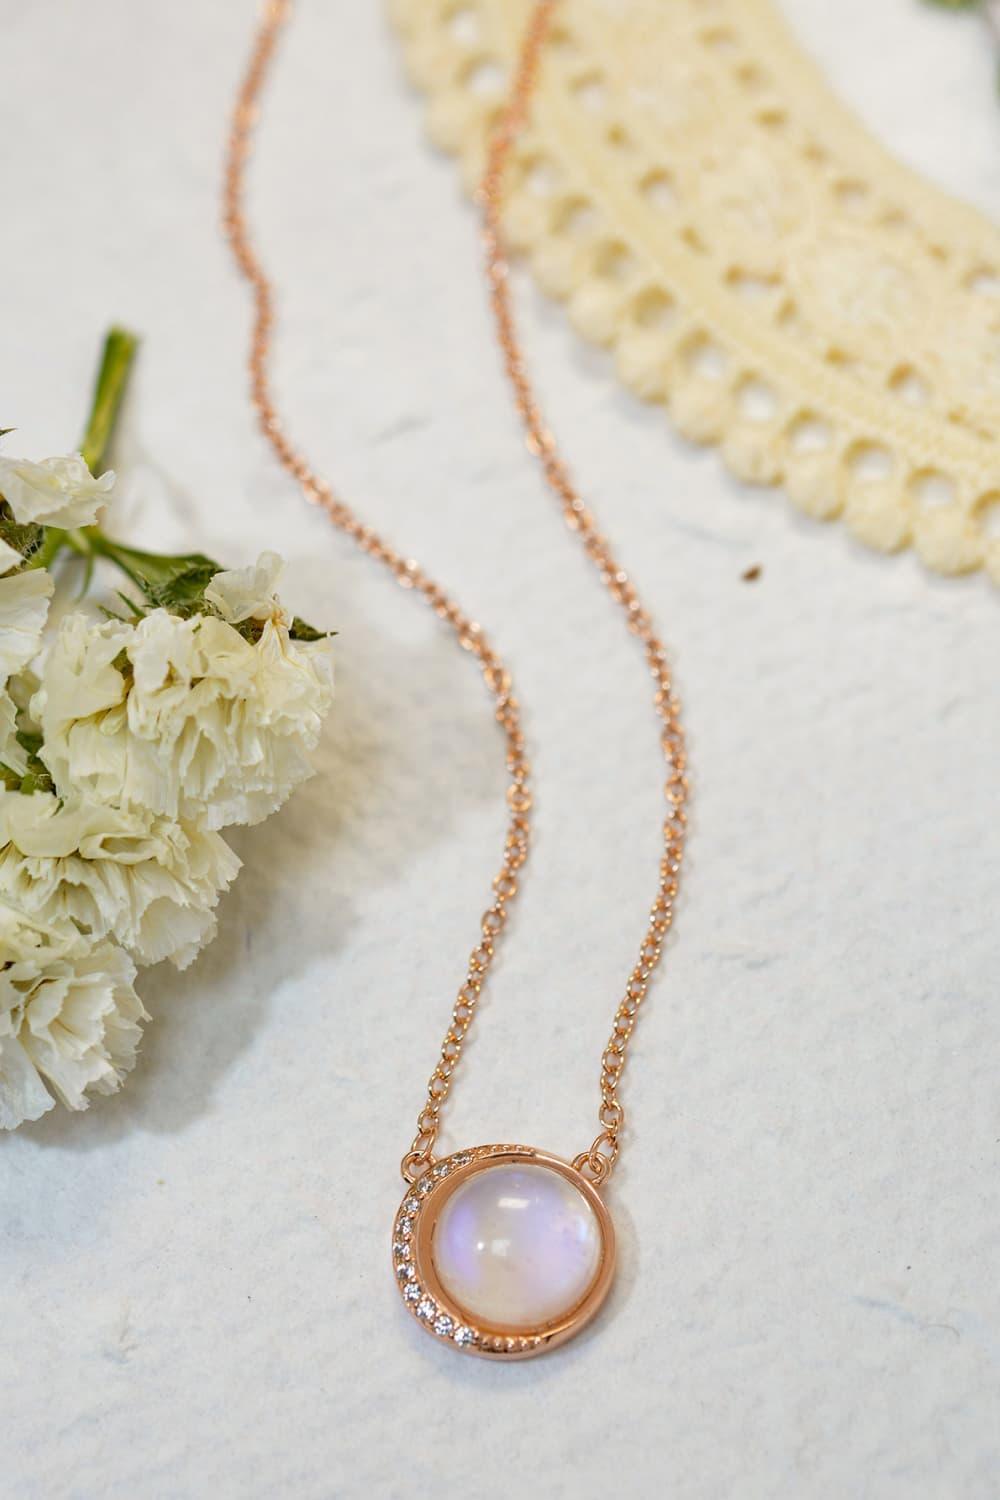 Tranquil Life Rose Gold Plated Chain Moonstone Necklace - MXSTUDIO.COM